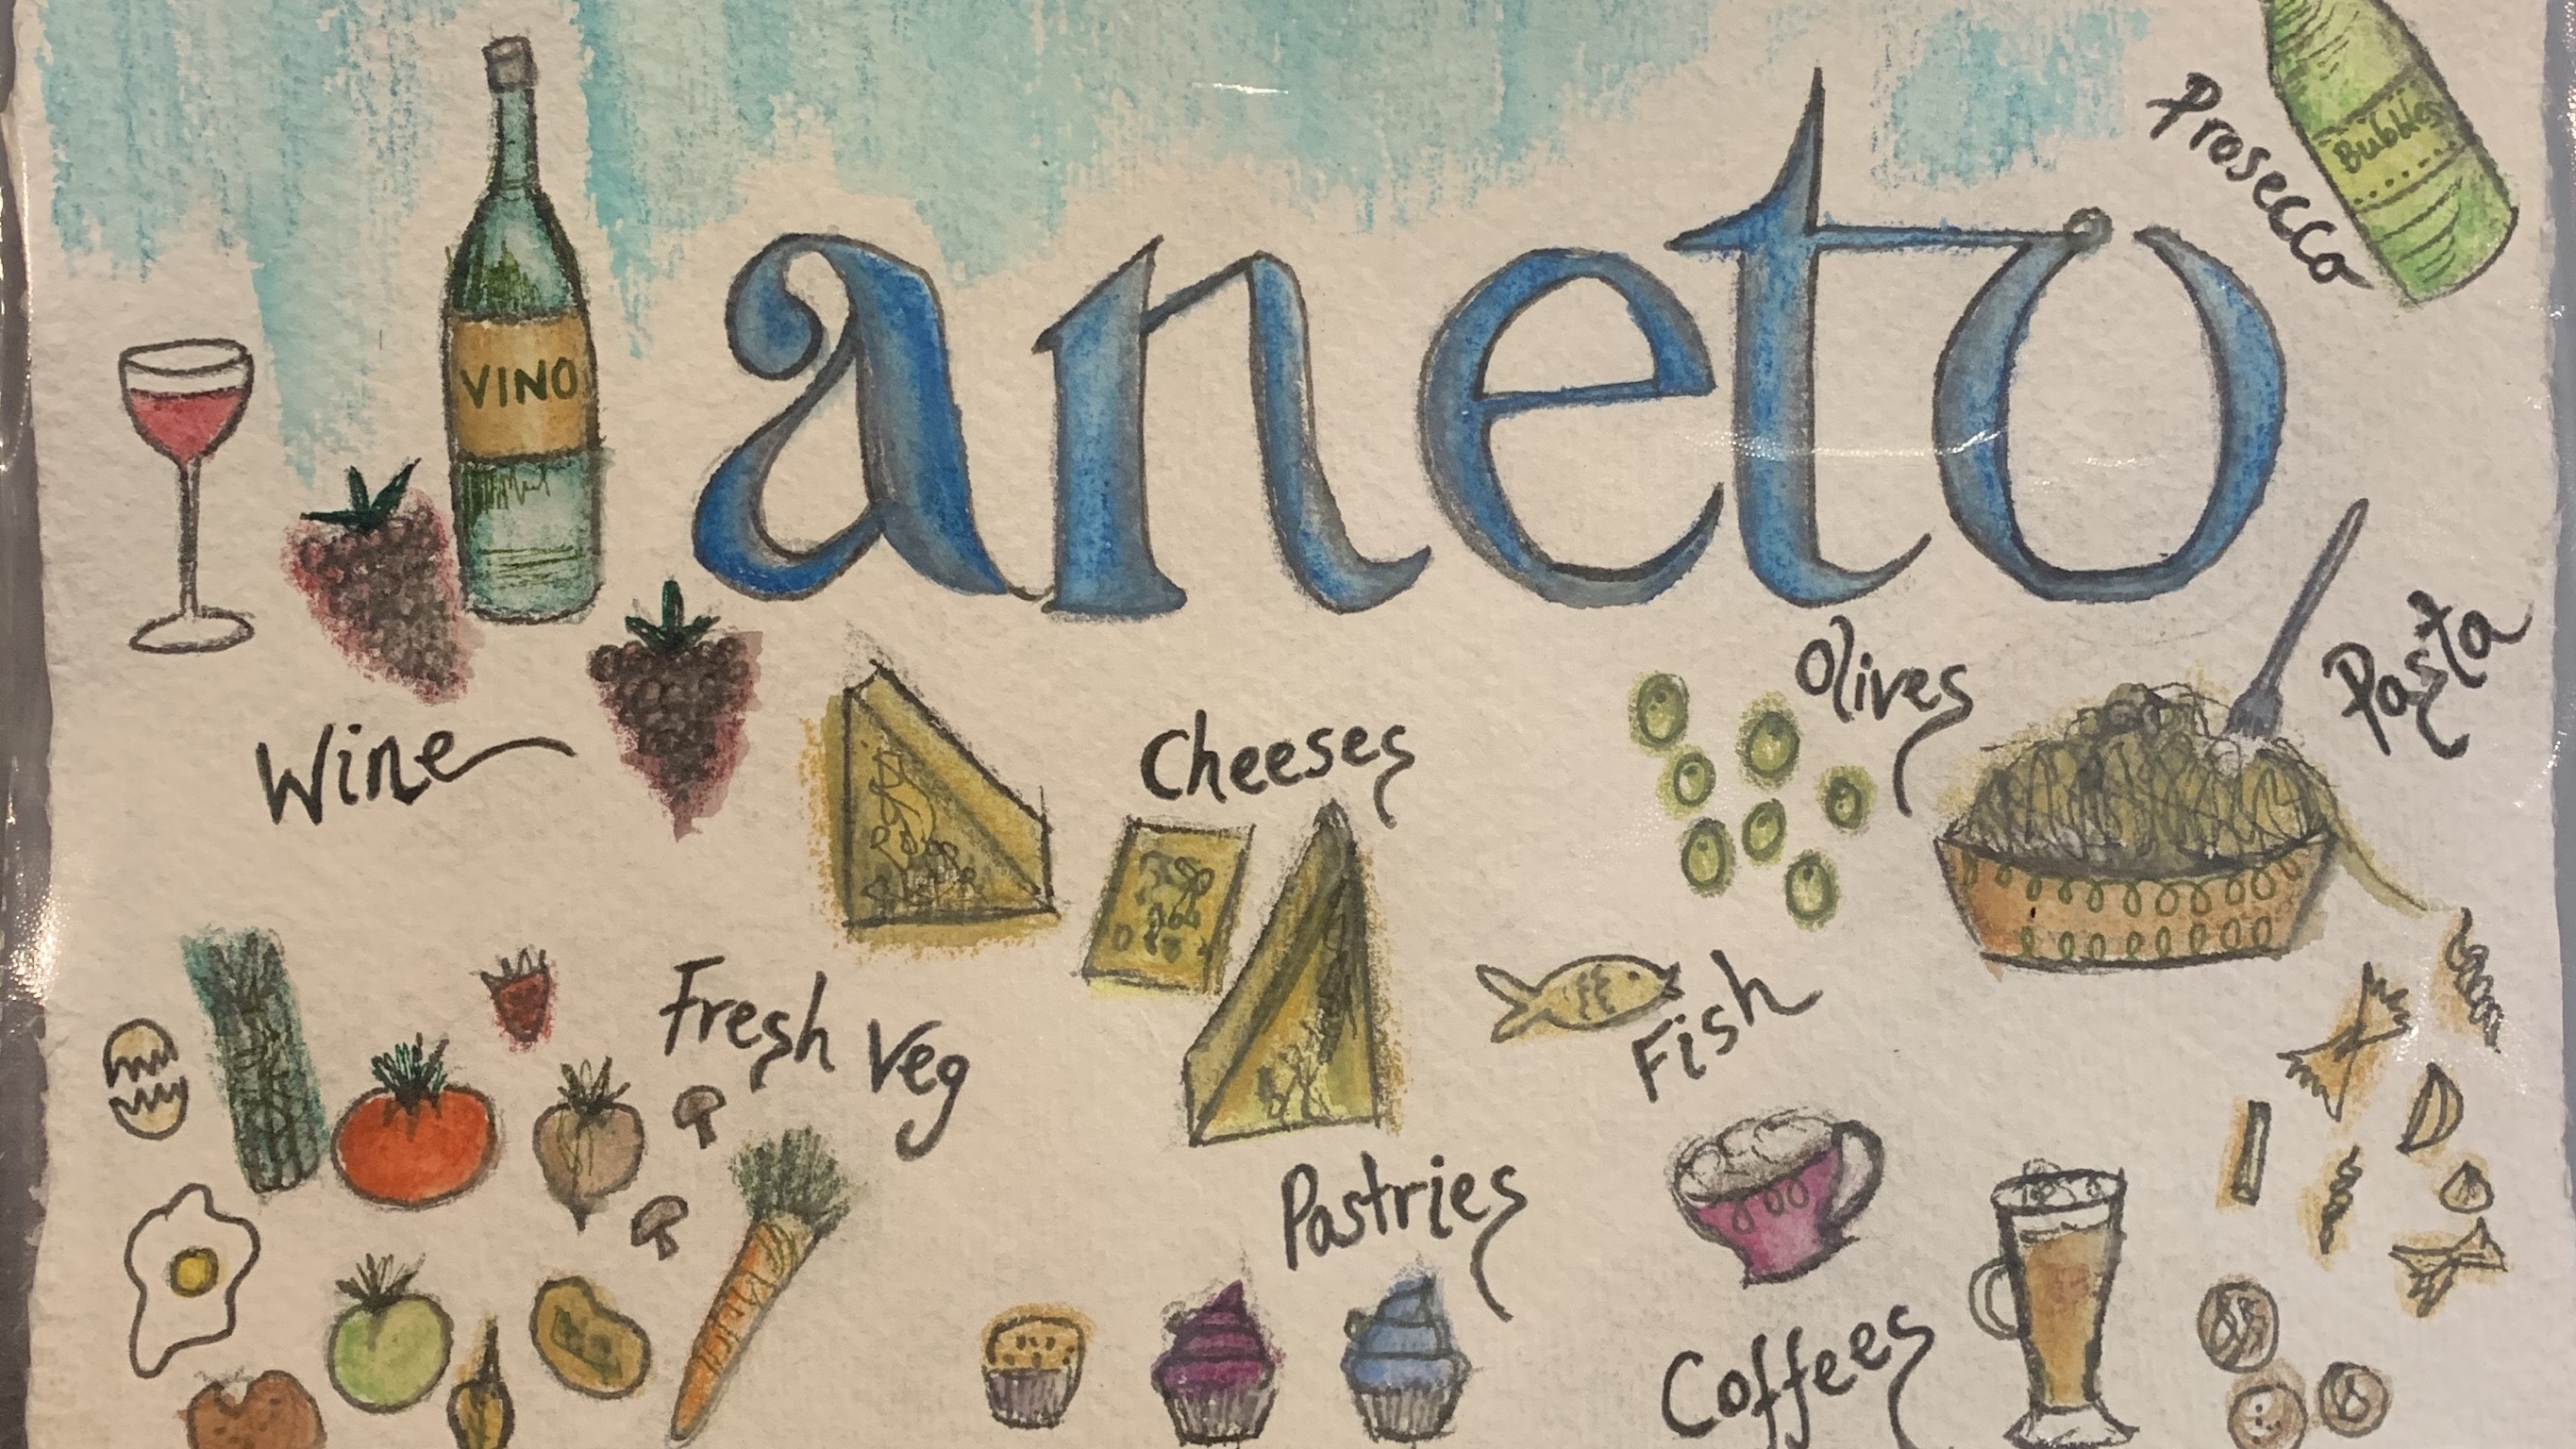 Help keep Aneto Cafe open